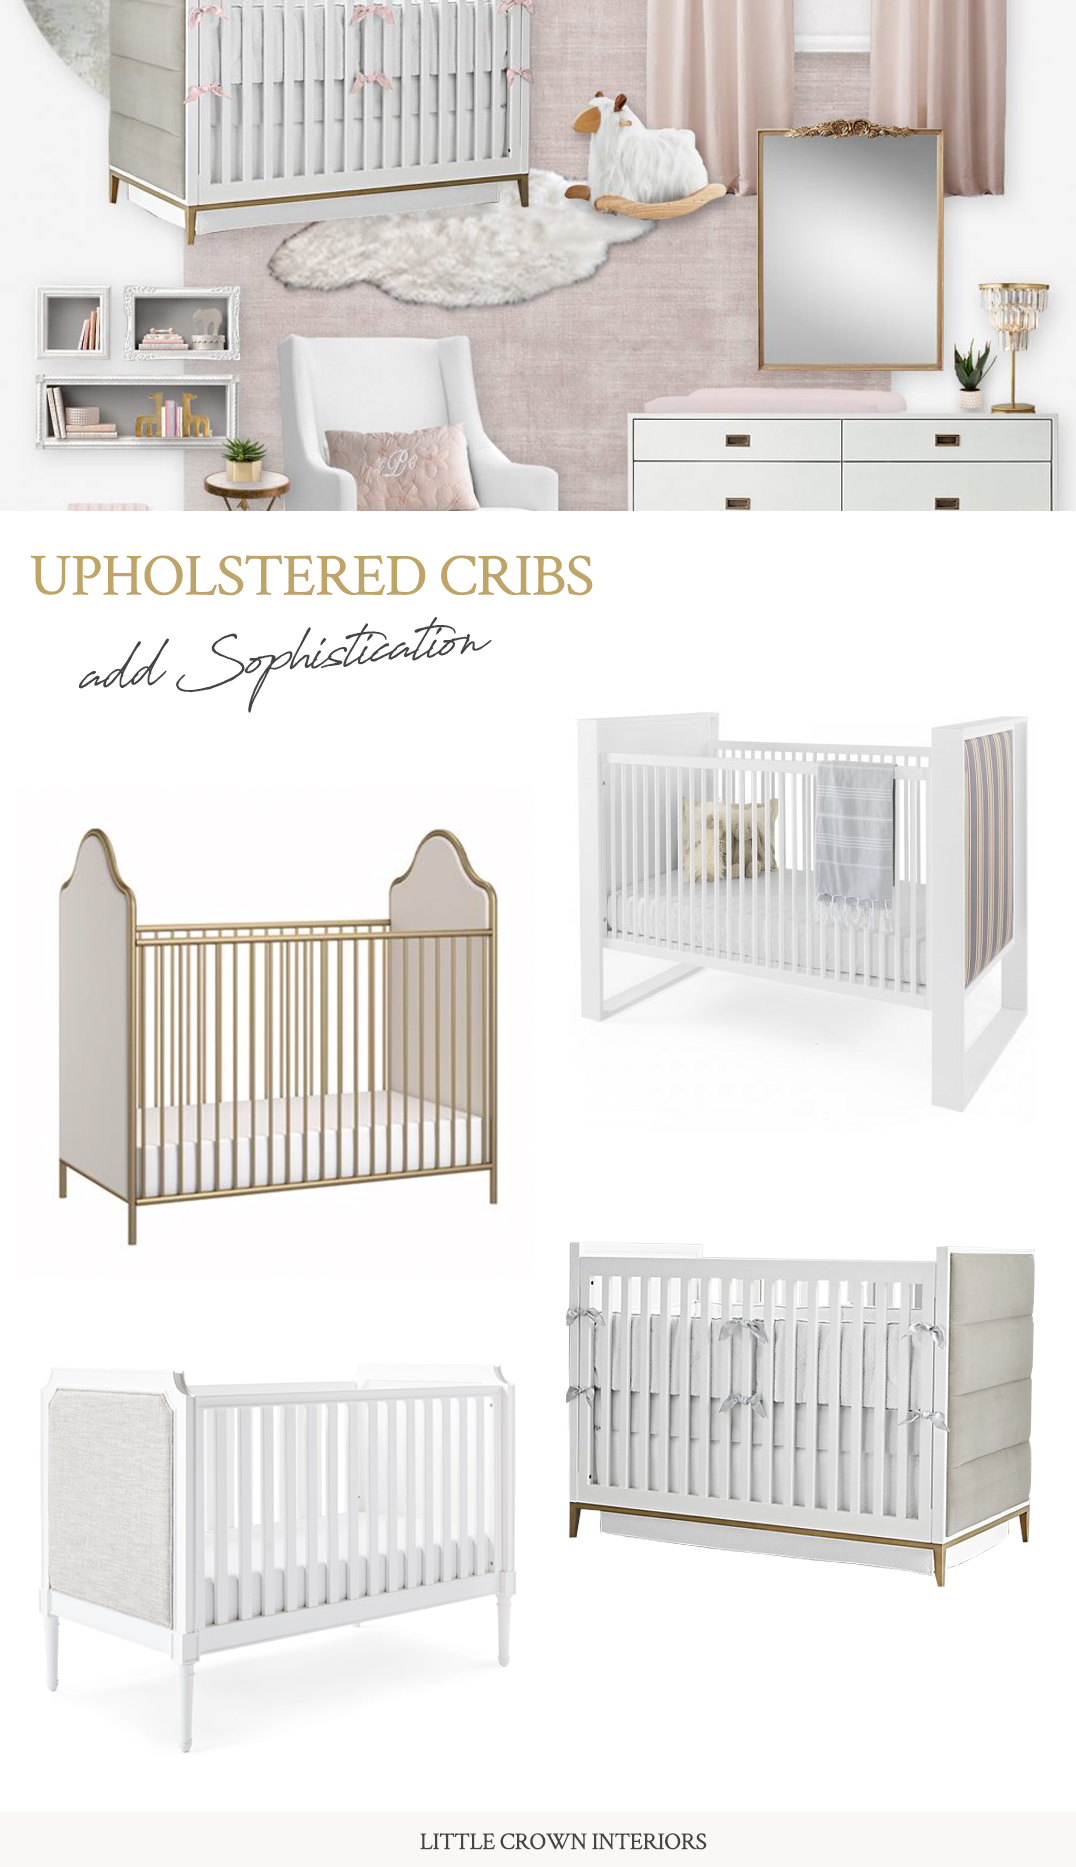 Get a Sophisticated Nursery with an Upholstered Crib